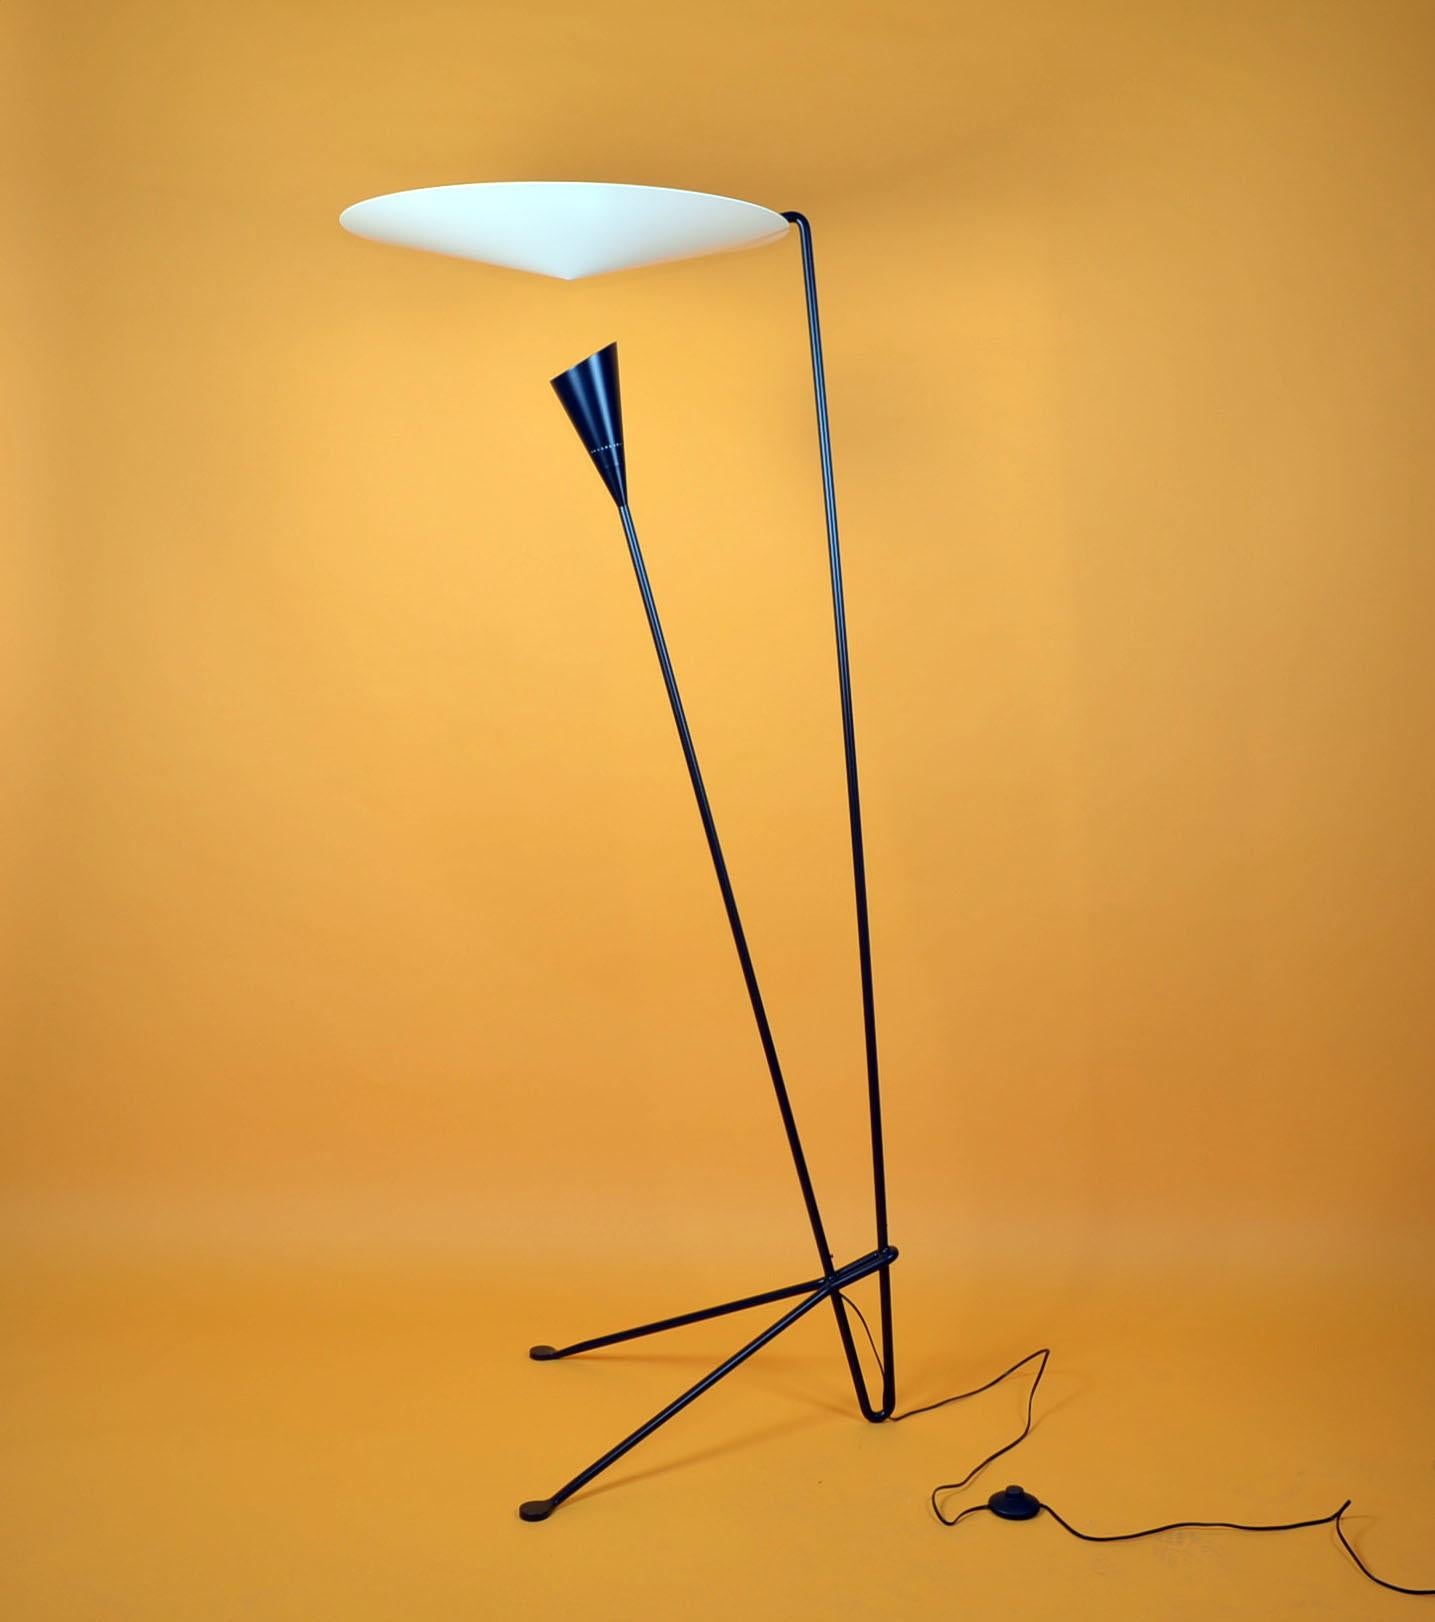 Dynamic lines and an innovative means by which the light is dispersed are signatures of this Michel Buffet lamp. Light shines on the conical disc above from the shade below and is reflected out.

This lamp comes is black and white.

